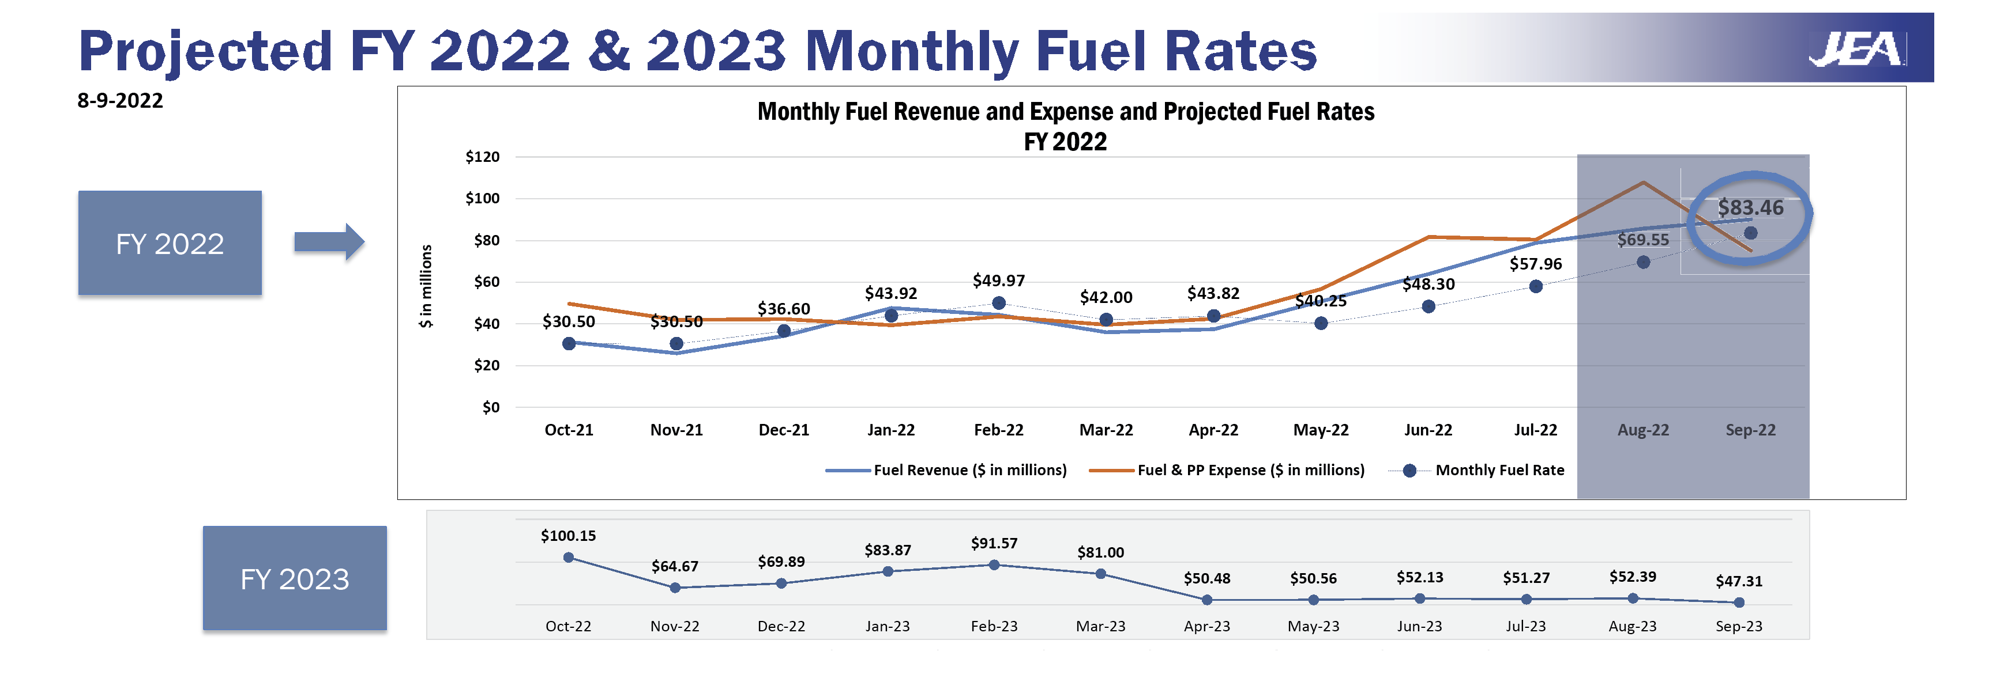 This JEA chart shows that the utility expects monthly fuel rates to decline by about 50% by April 2023.